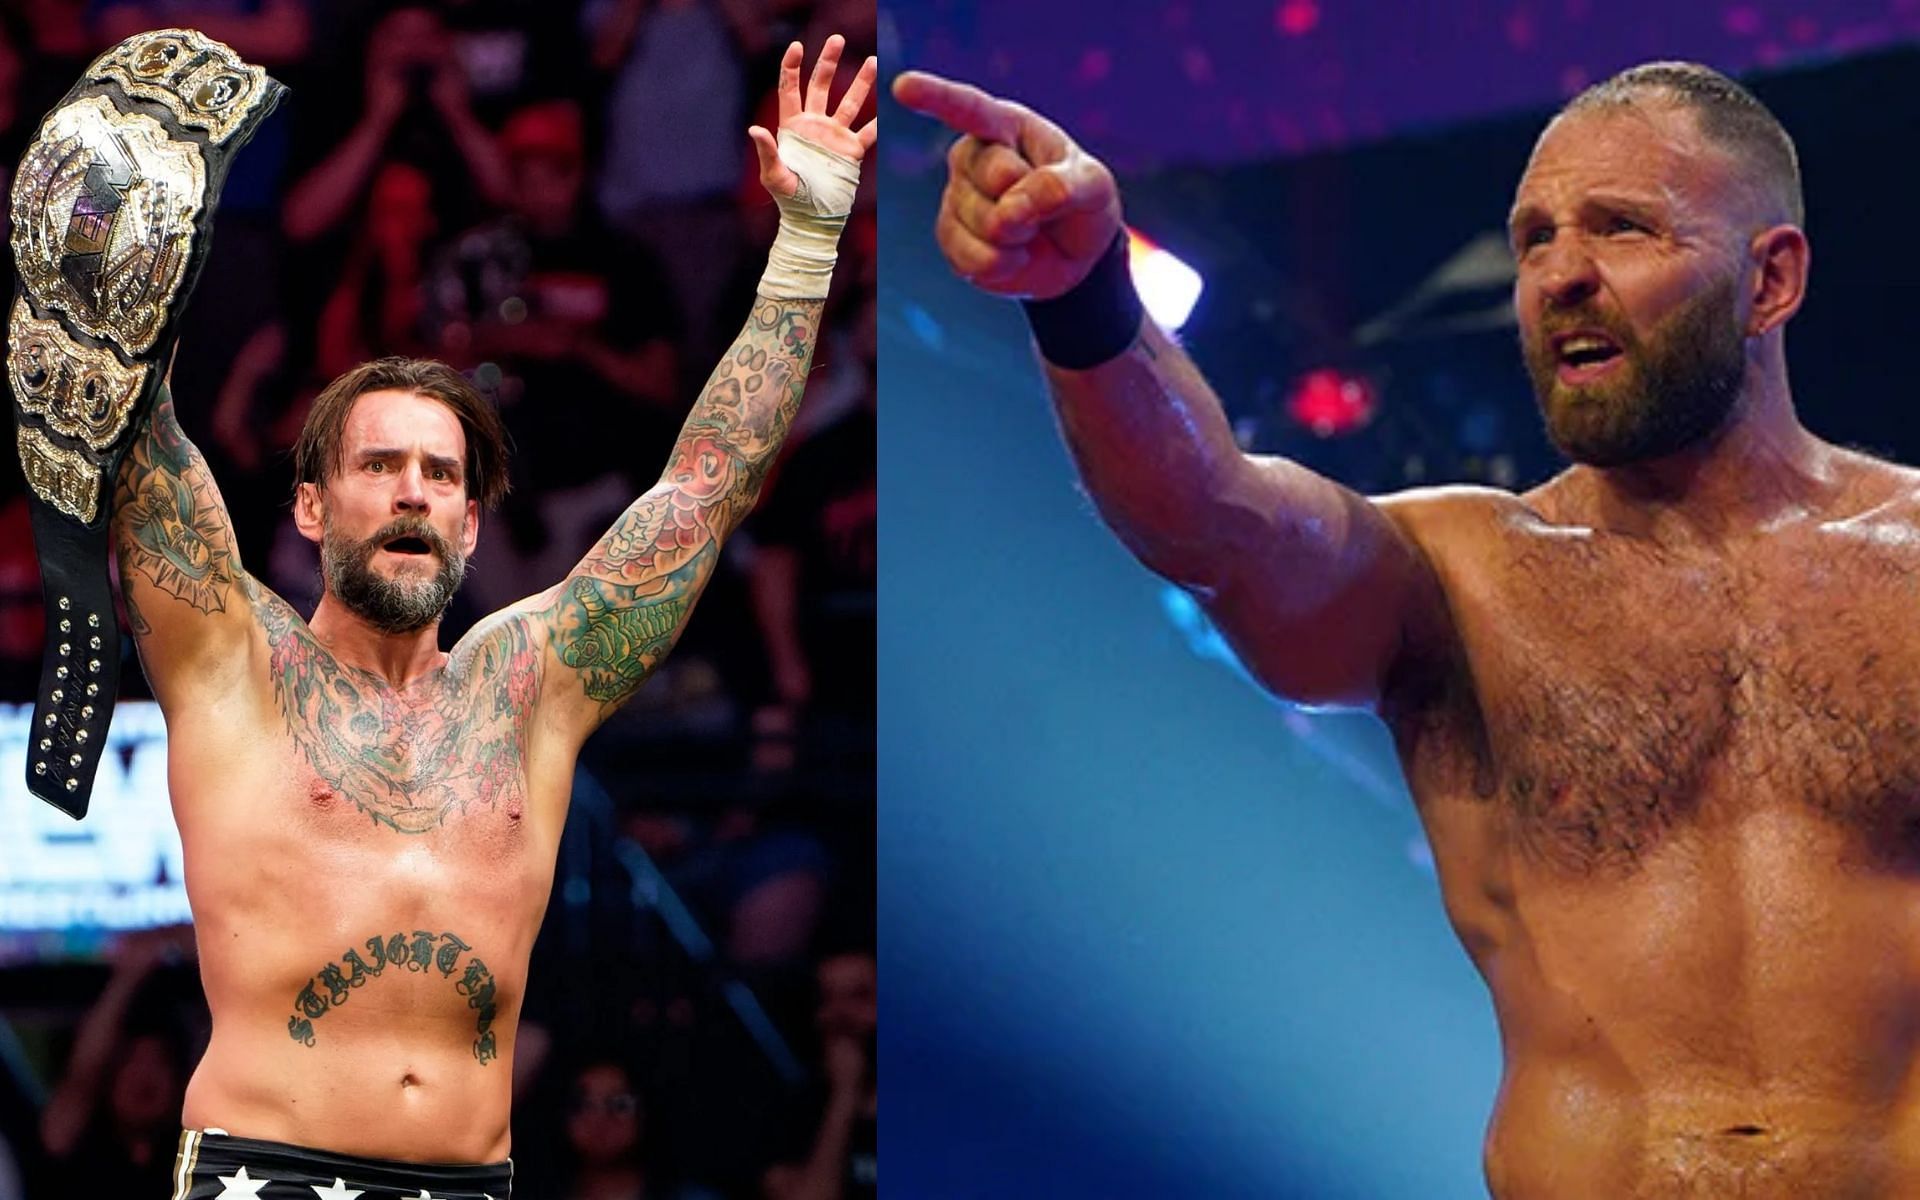 CM Punk (left) and Jon Moxley (right).